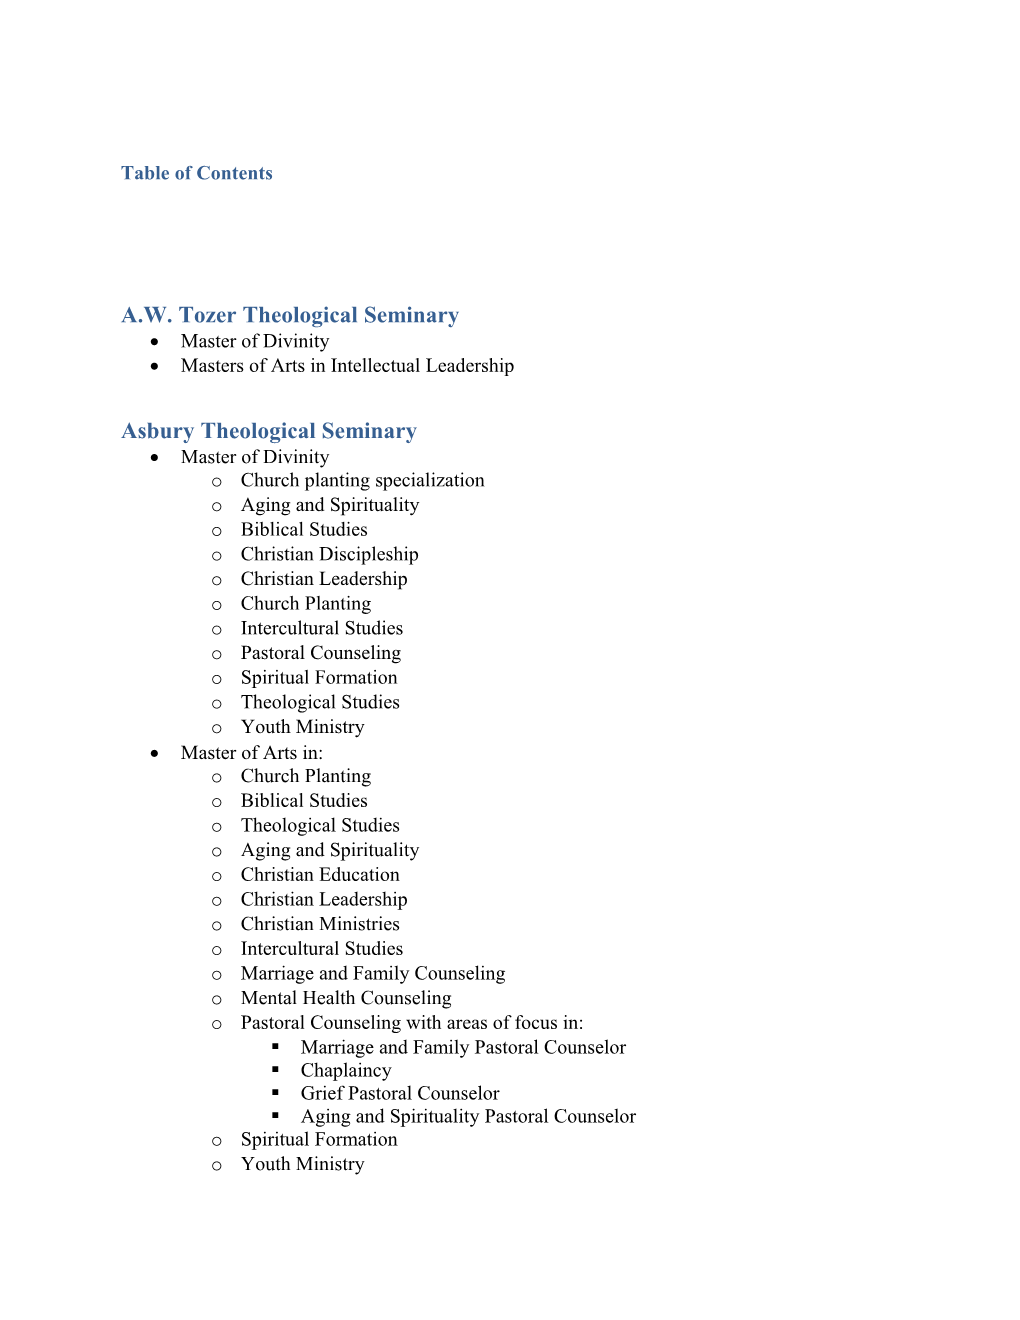 Table of Contents s196